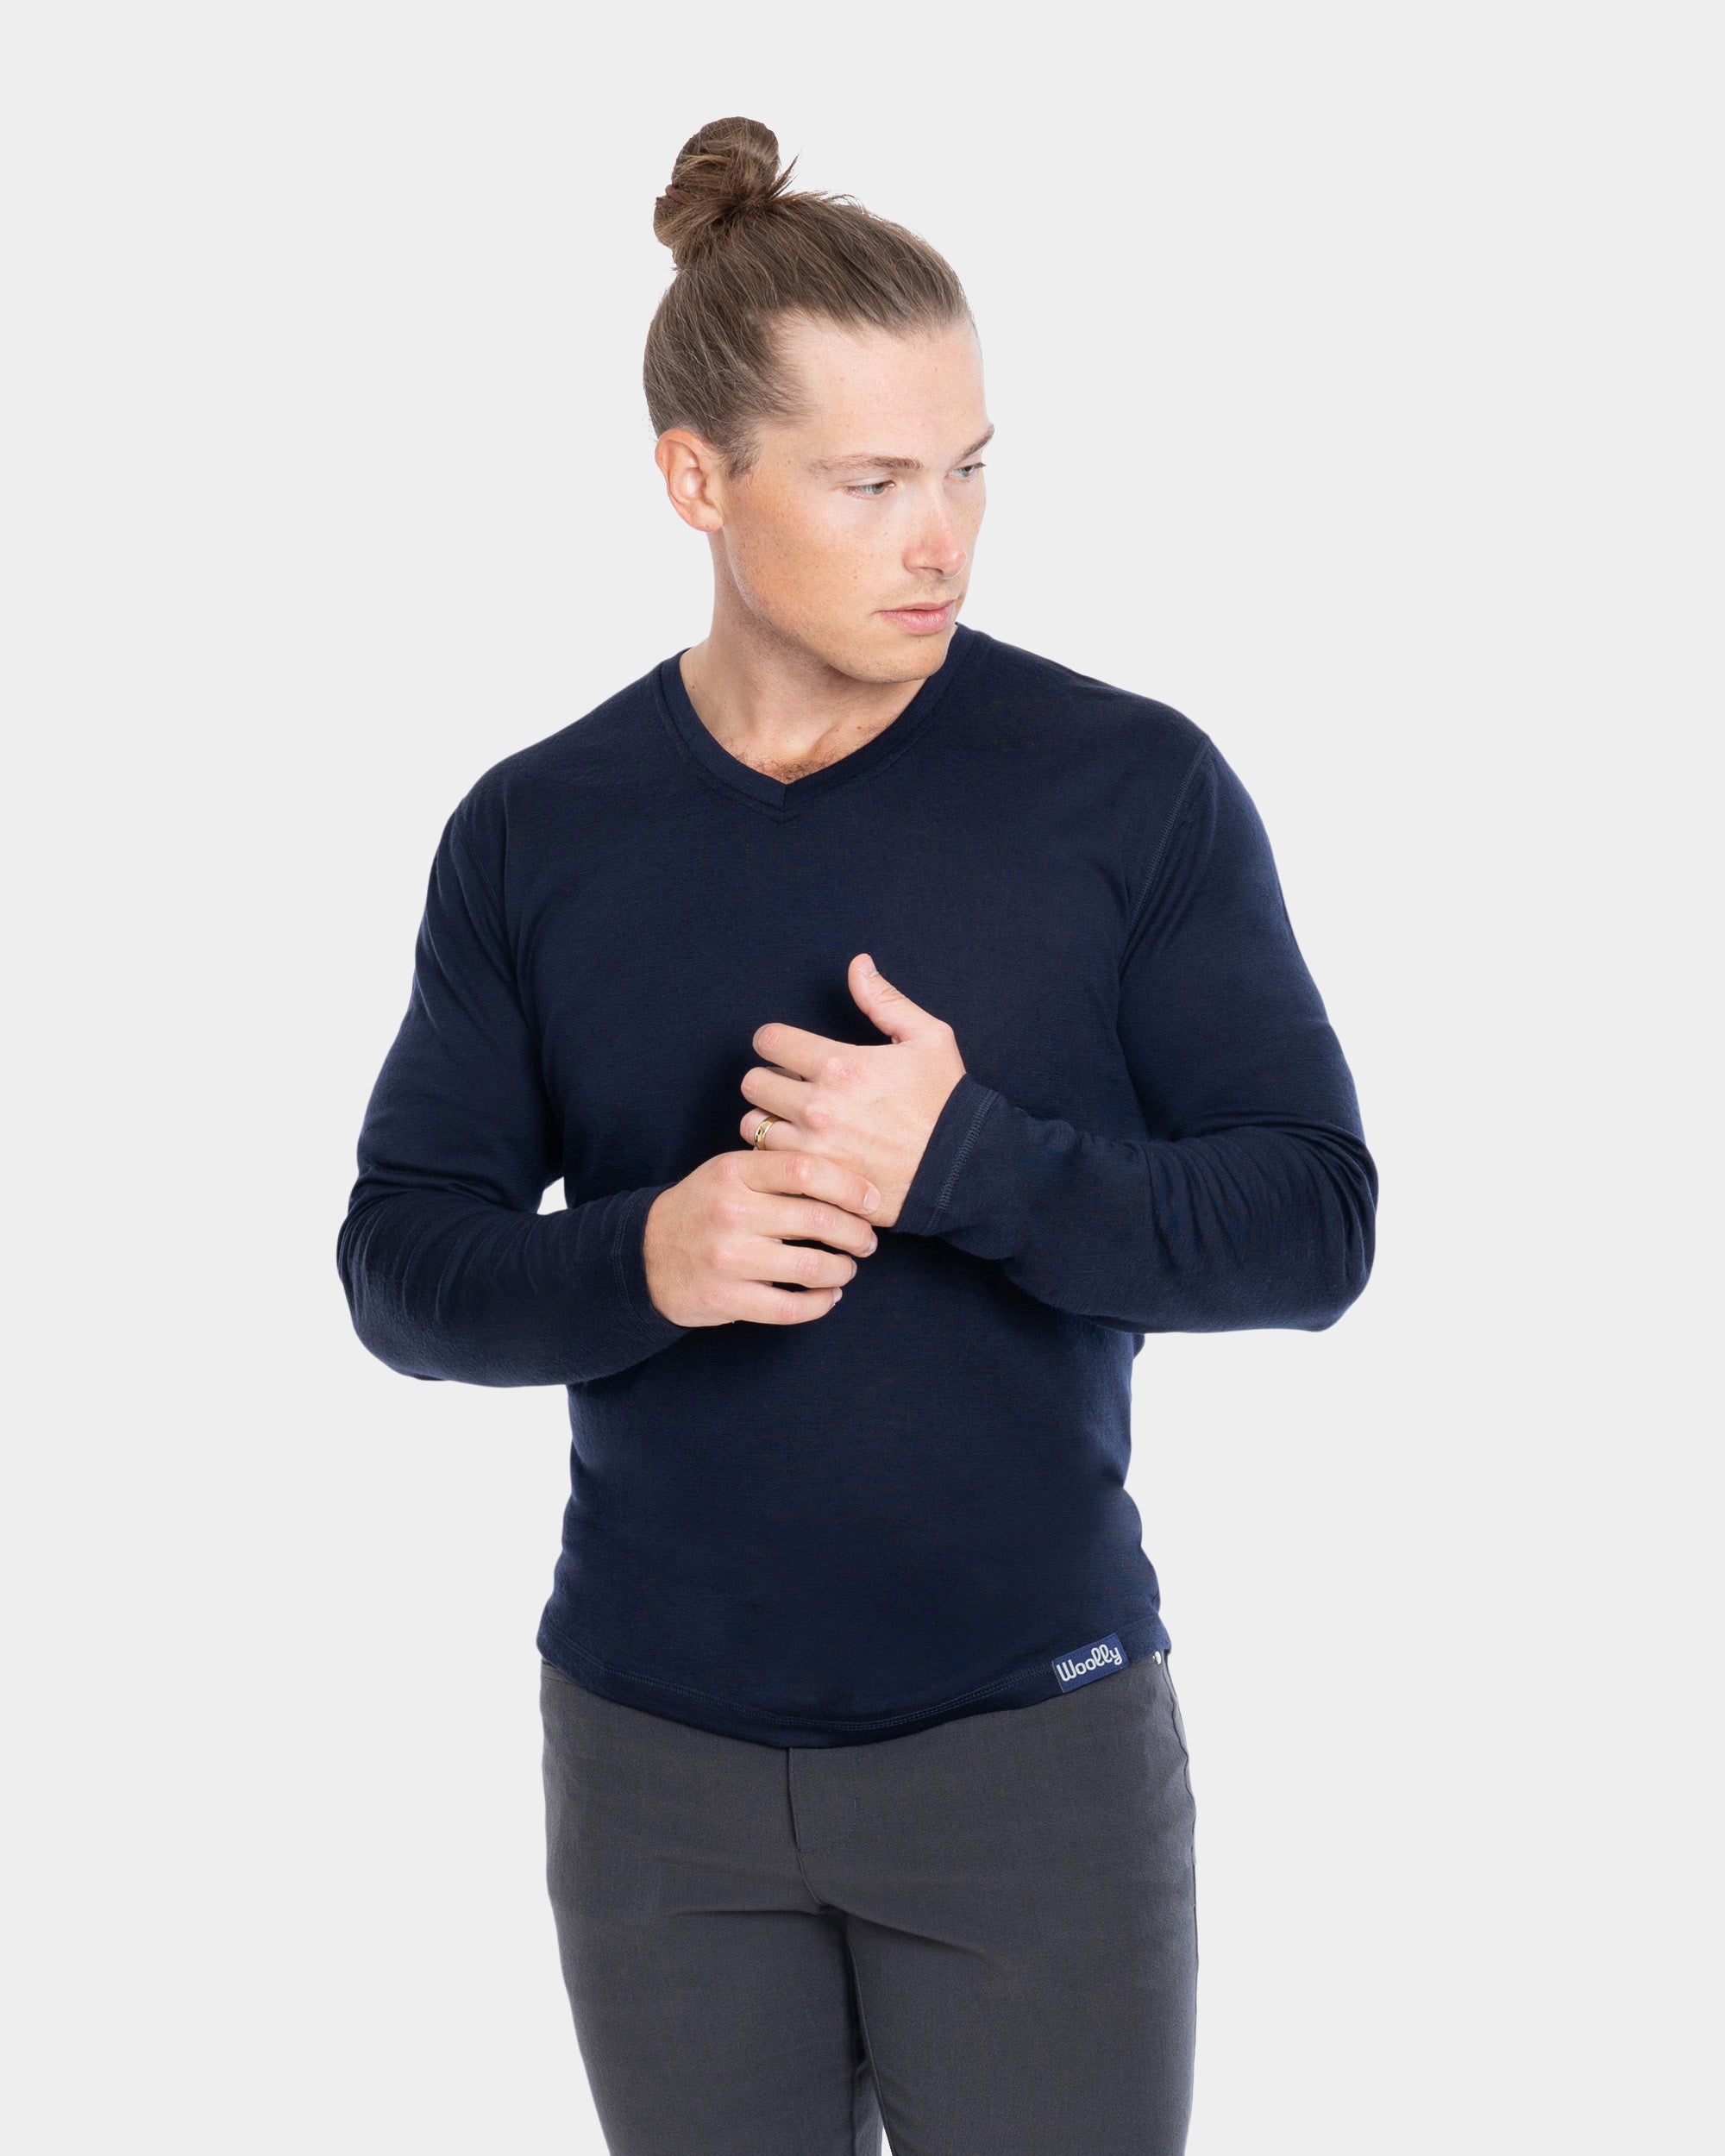 Woolly Clothing Men's Merino Wool V-Neck Tee Shirt - Ultralight - Wicking  Breathable Anti-Odor, Oatmeal, XX-Large : : Clothing, Shoes &  Accessories